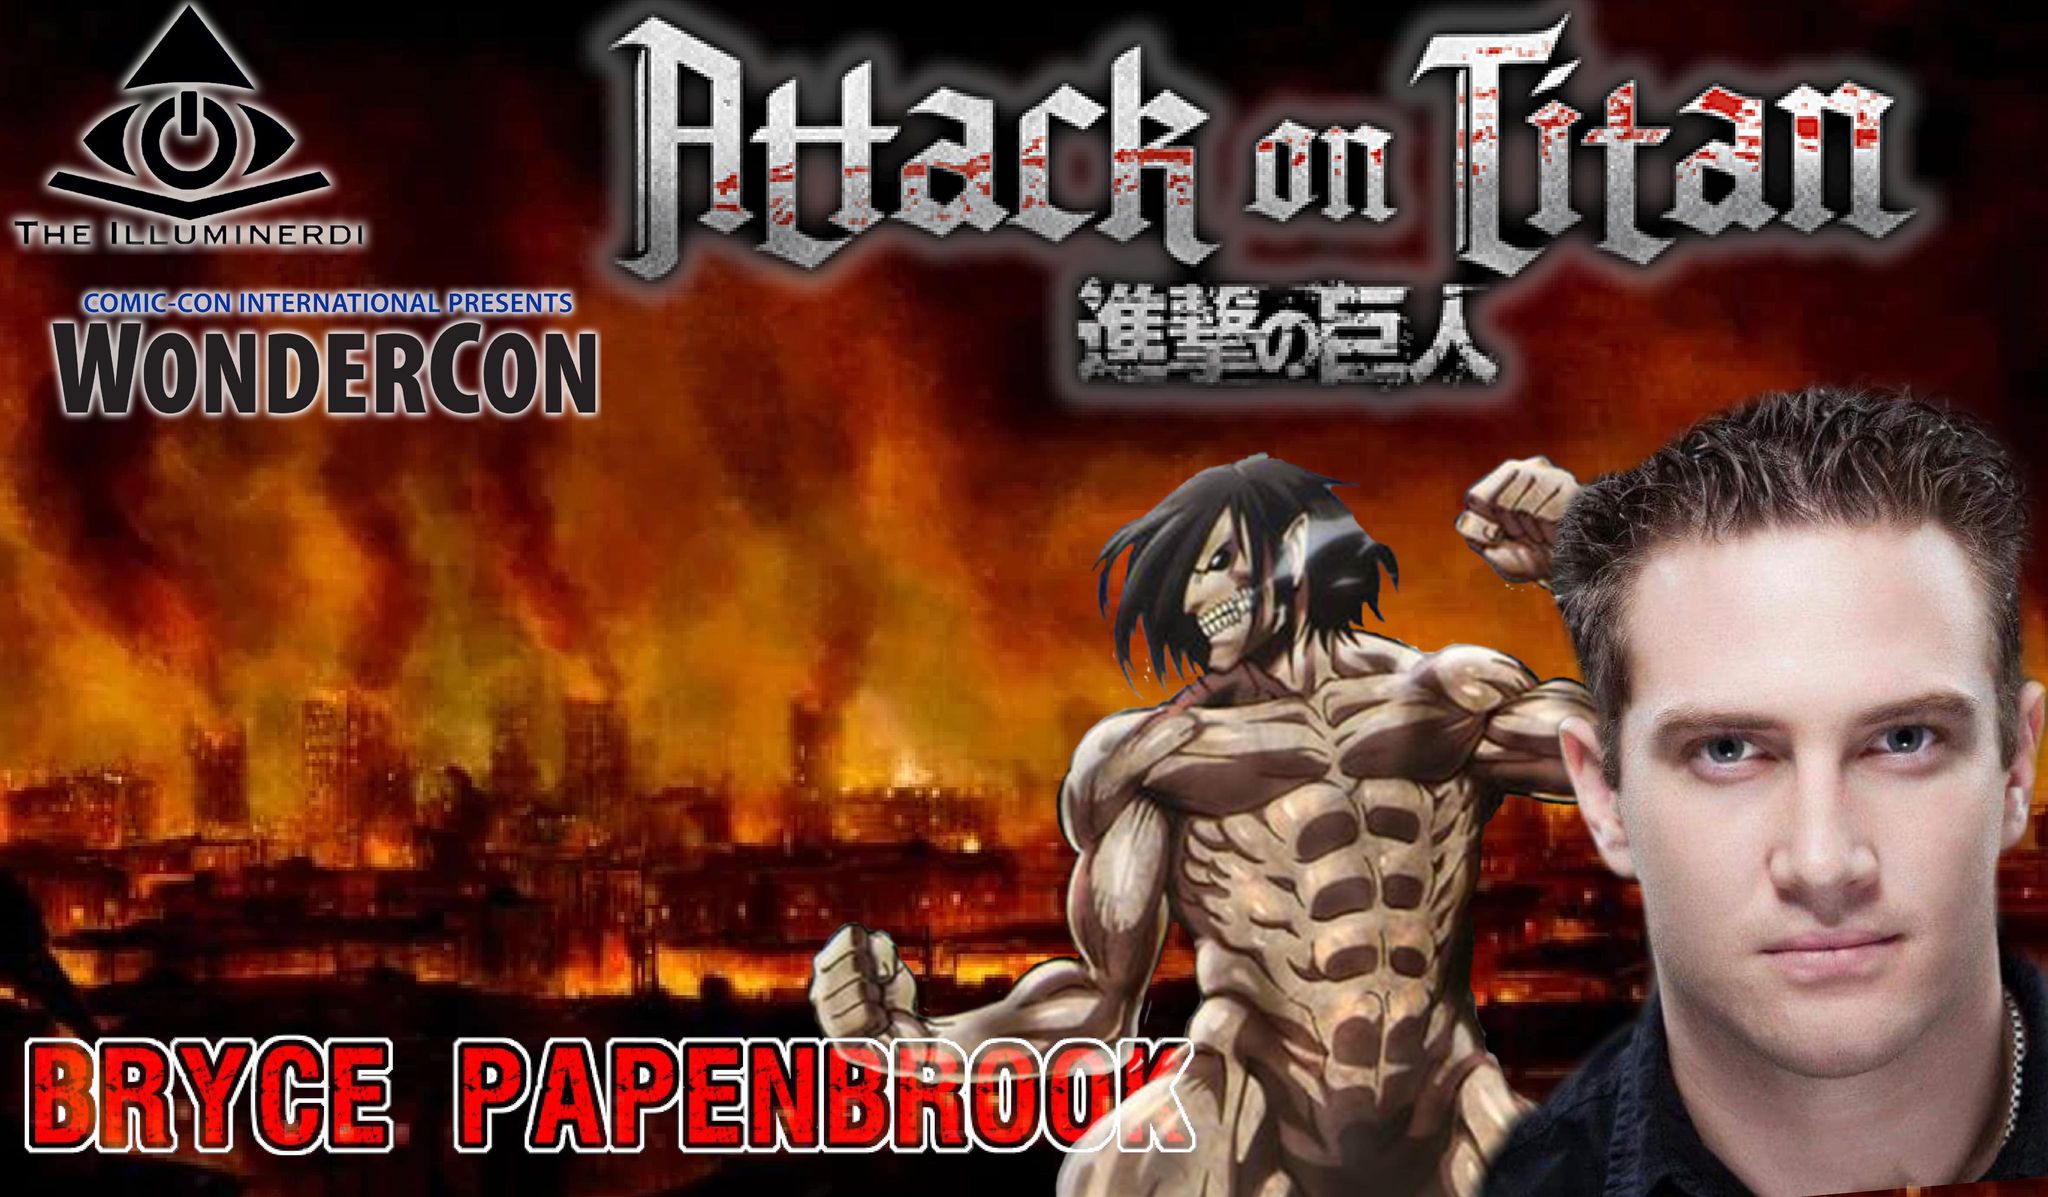 Attack On Titan Exclusive Interview: Voice Actor Bryce Papenbrook Discusses Thoughts On Parallels Between World War II and The Series